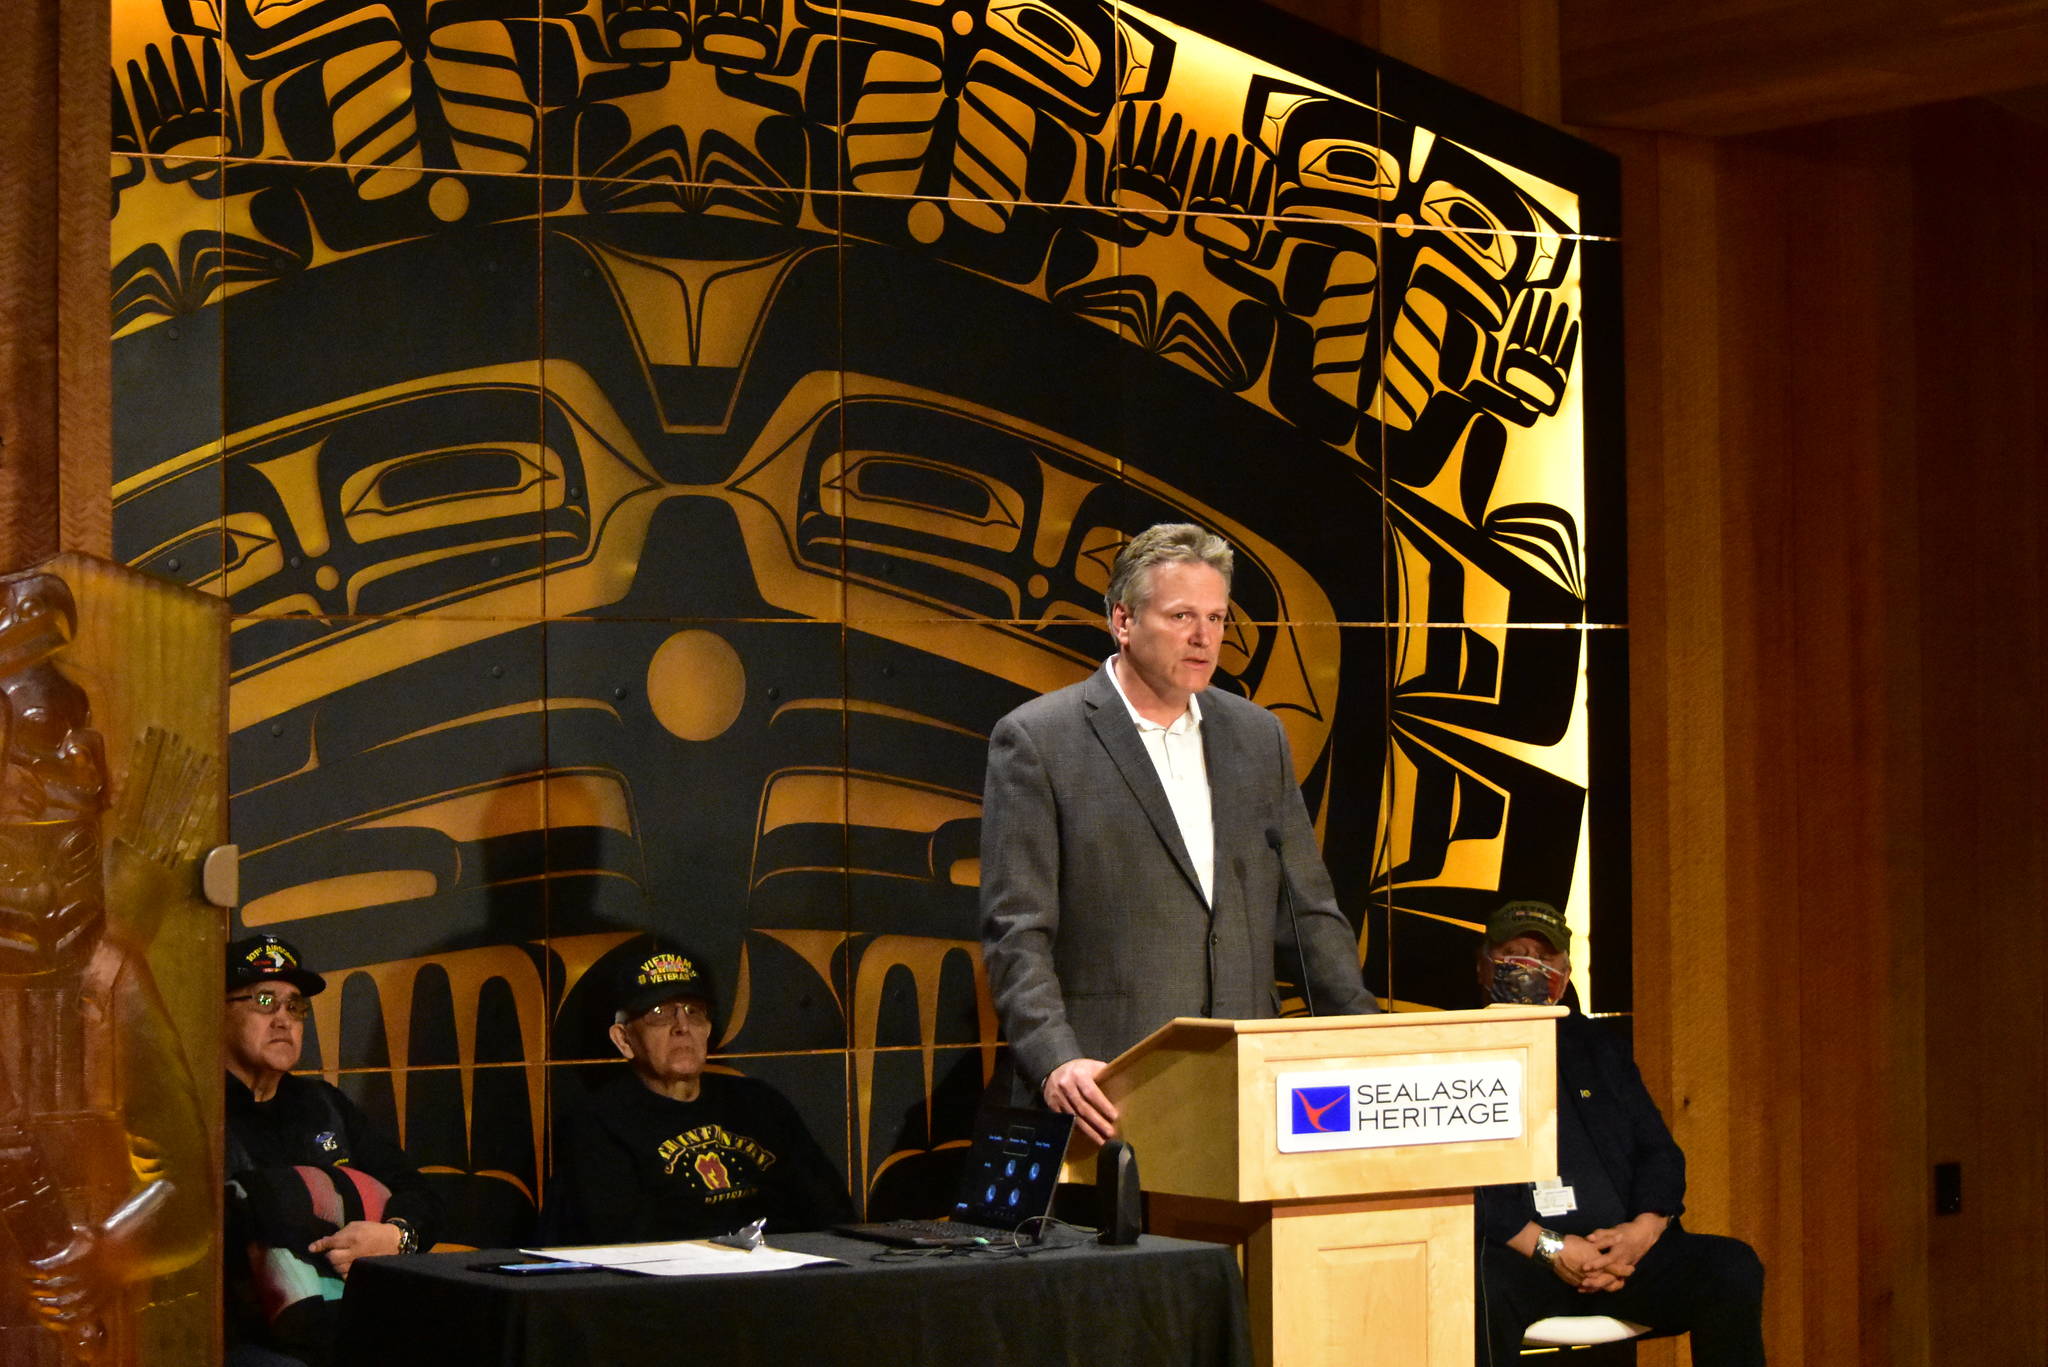 Gov. Mike Dunleavy speaks at a ceremony for Alaska Native Veterans from the Vietnam War era at the Walter Soboleff Building in downtown Juneau on May 5, 2021. Dunleavy announced the state filed a lawsuit Wednesday against the Biden administration for what Dunleavy says is illegally keeping restrictions in place on federal lands in Alaska. (Peter Segall / Juneau Empire)